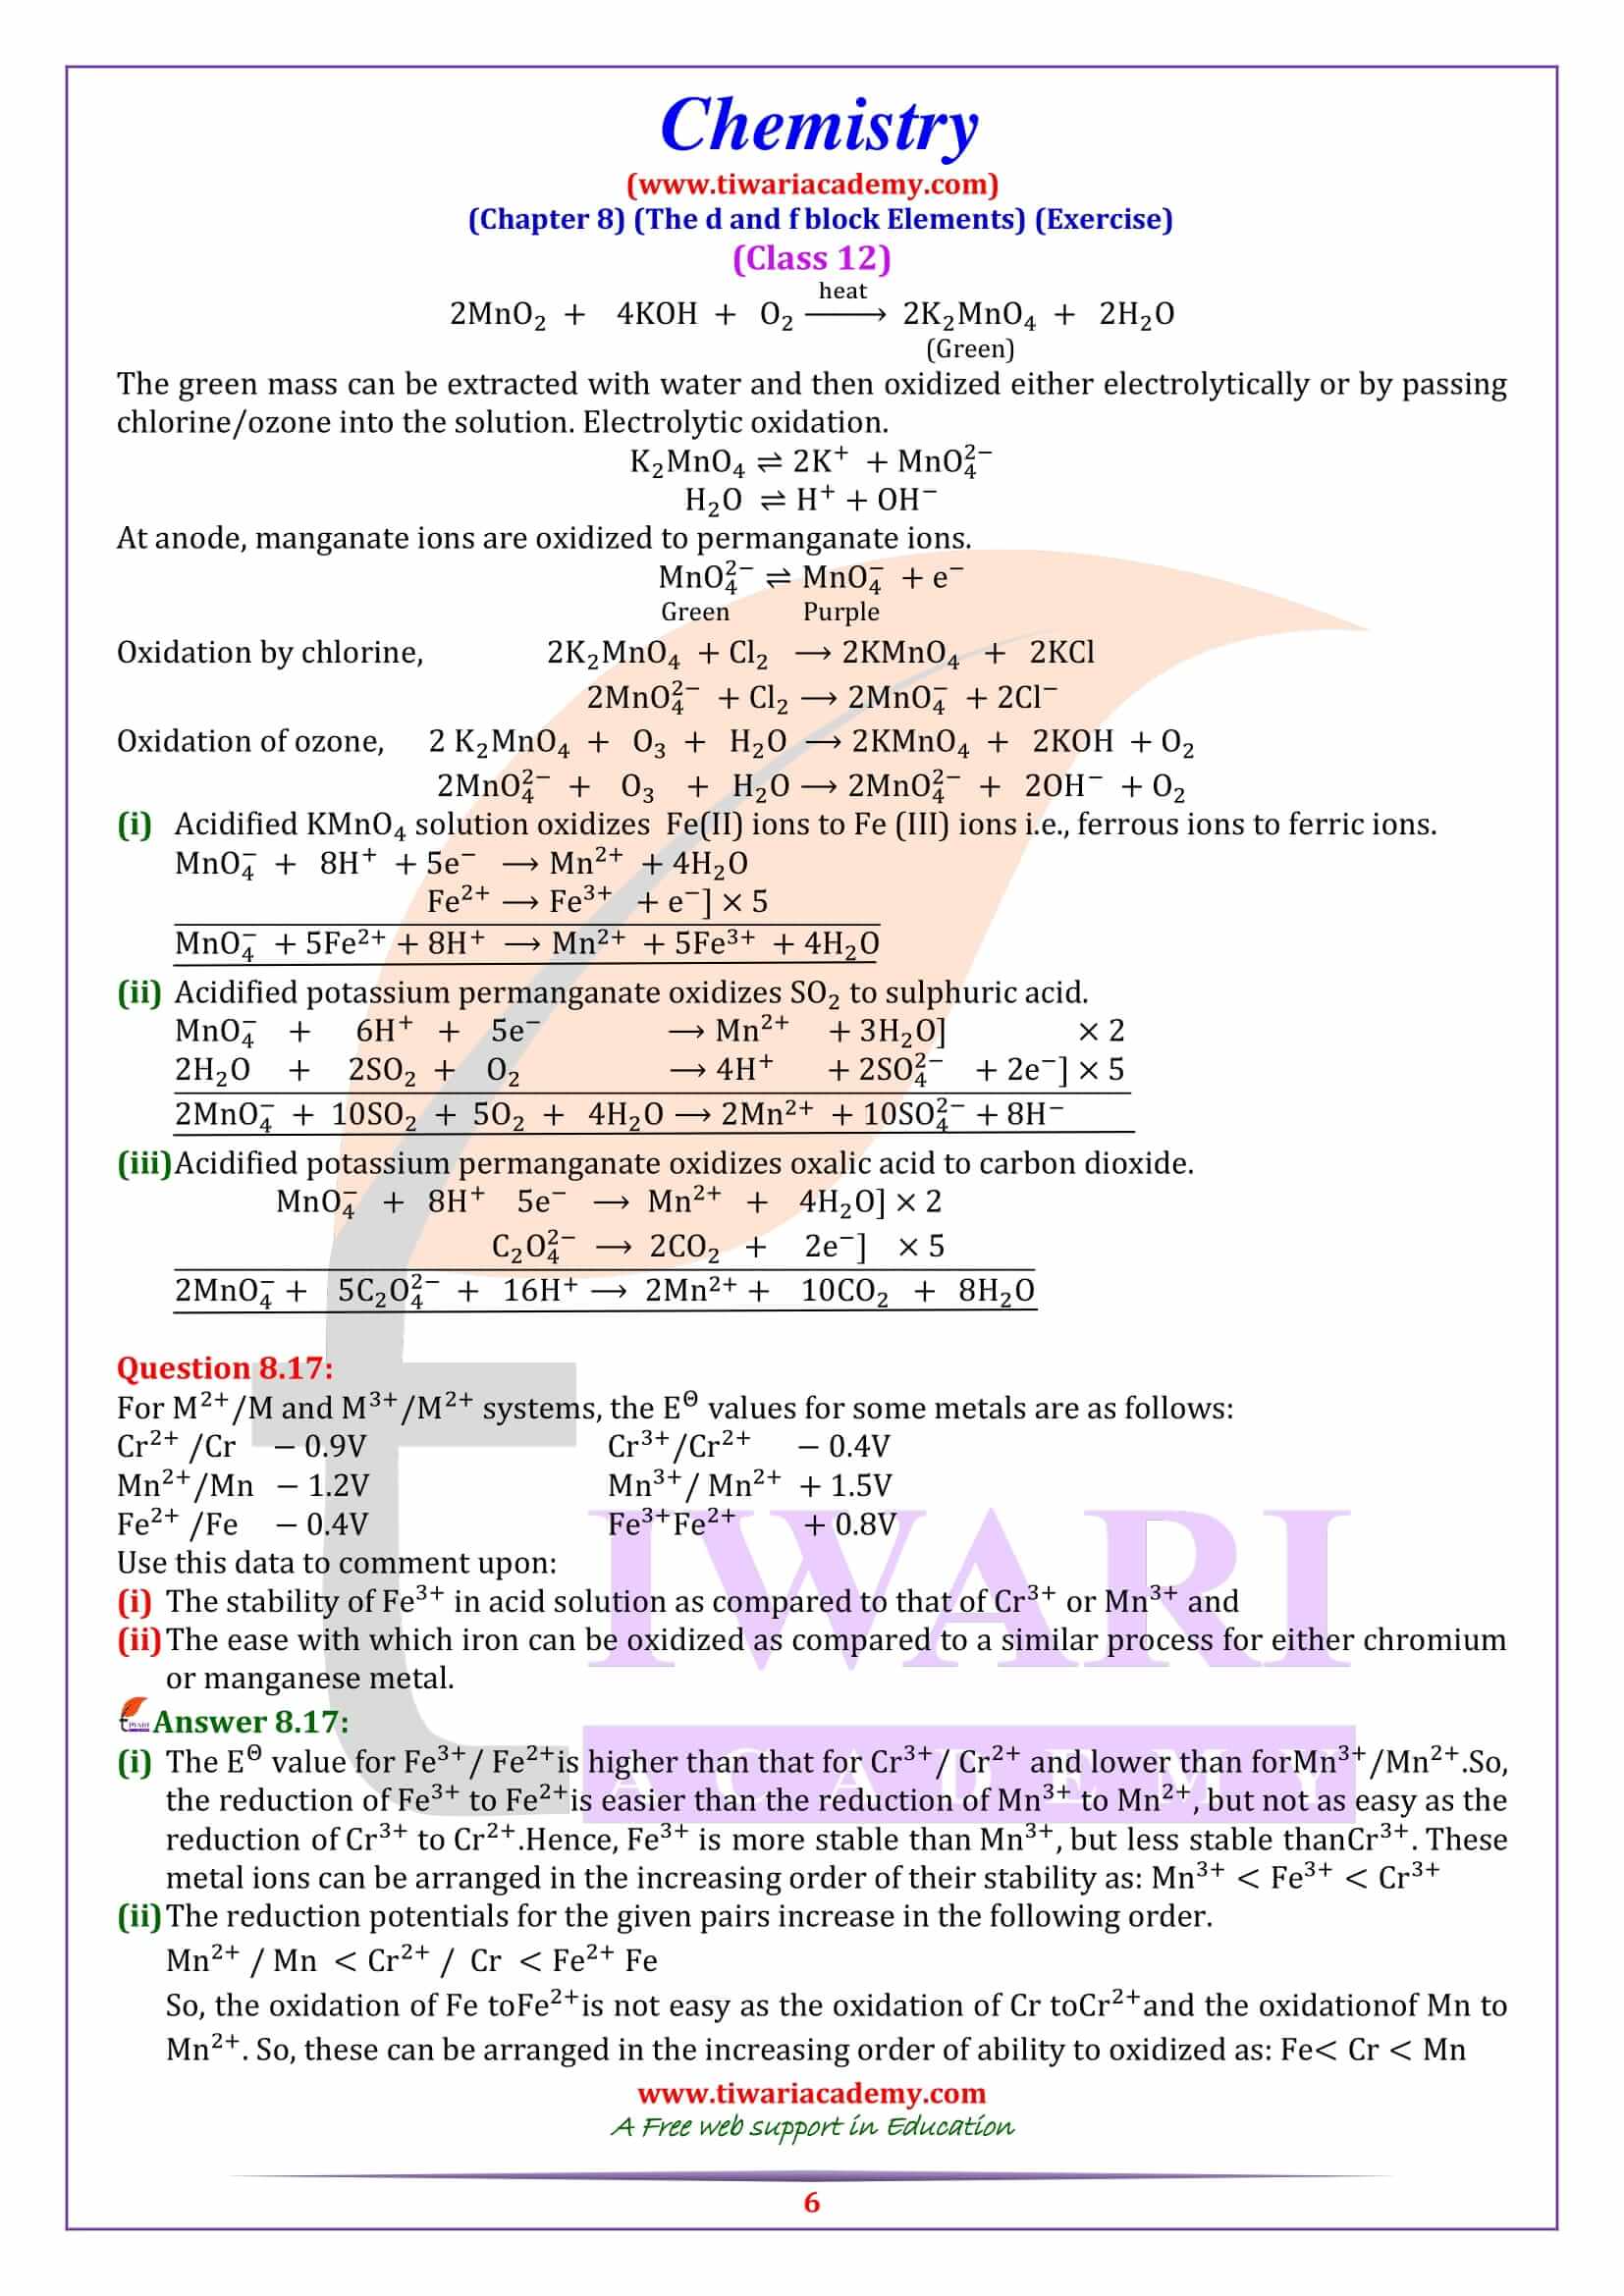 NCERT Solutions for Class 12 Chemistry Chapter 8 Question answers